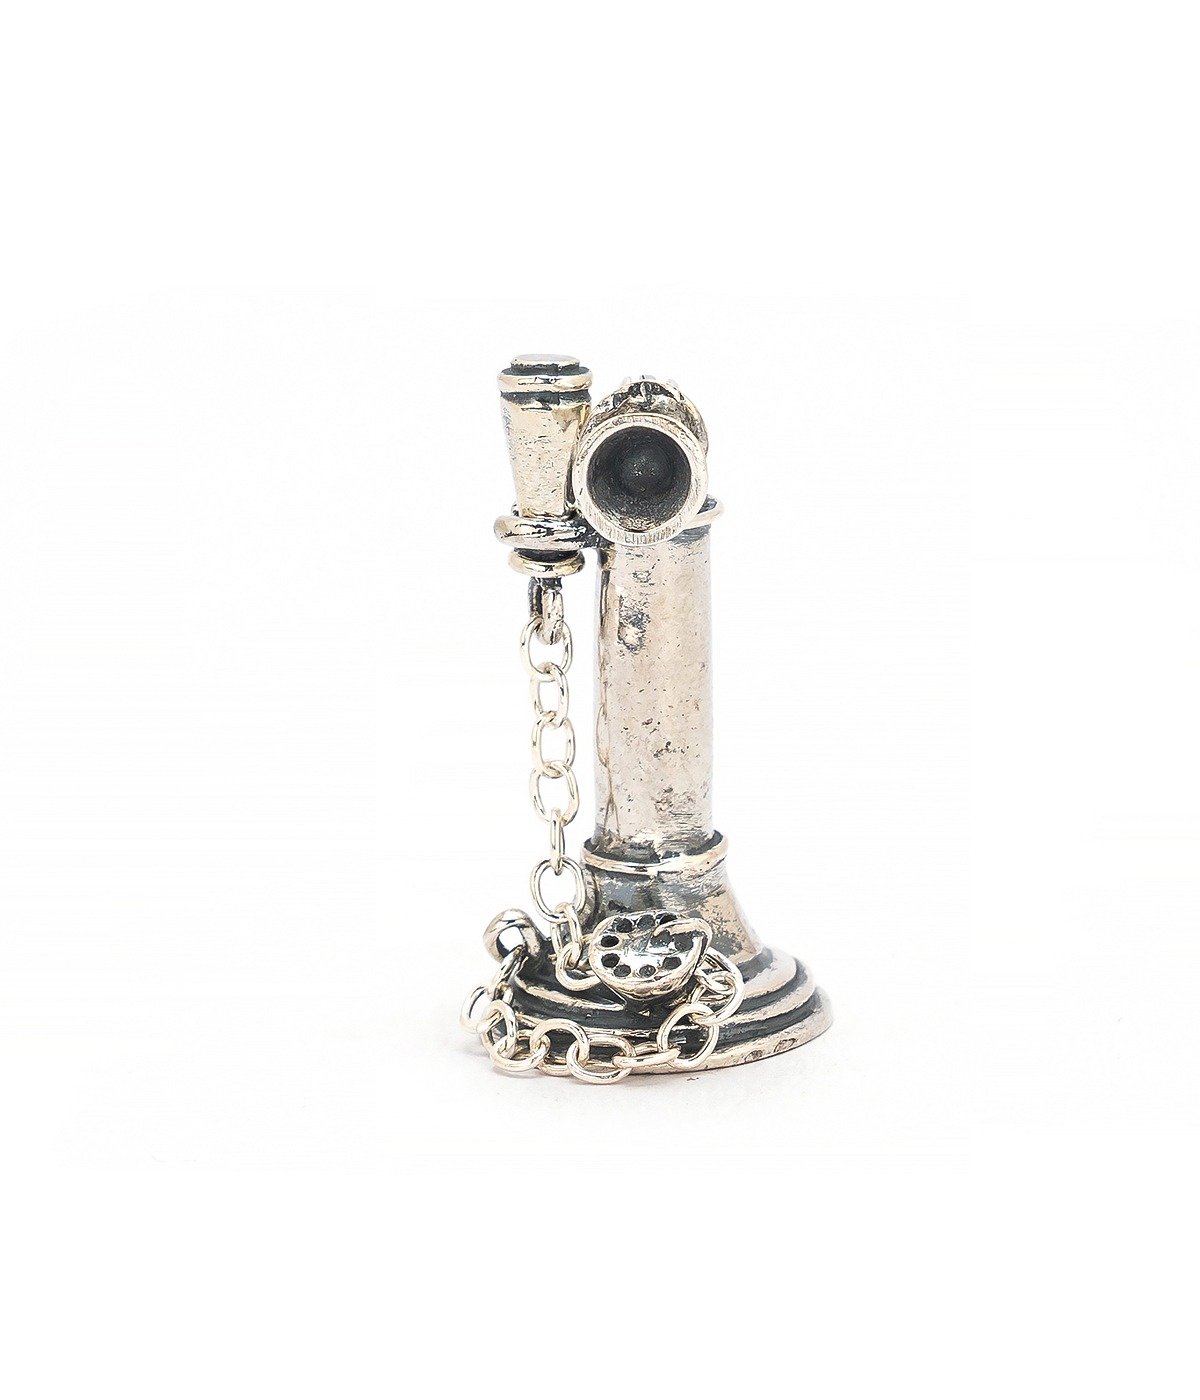 92.5 STERLING SILVER  MINIATURE á¹¬ELEPHONE CHARM FOR GIFT